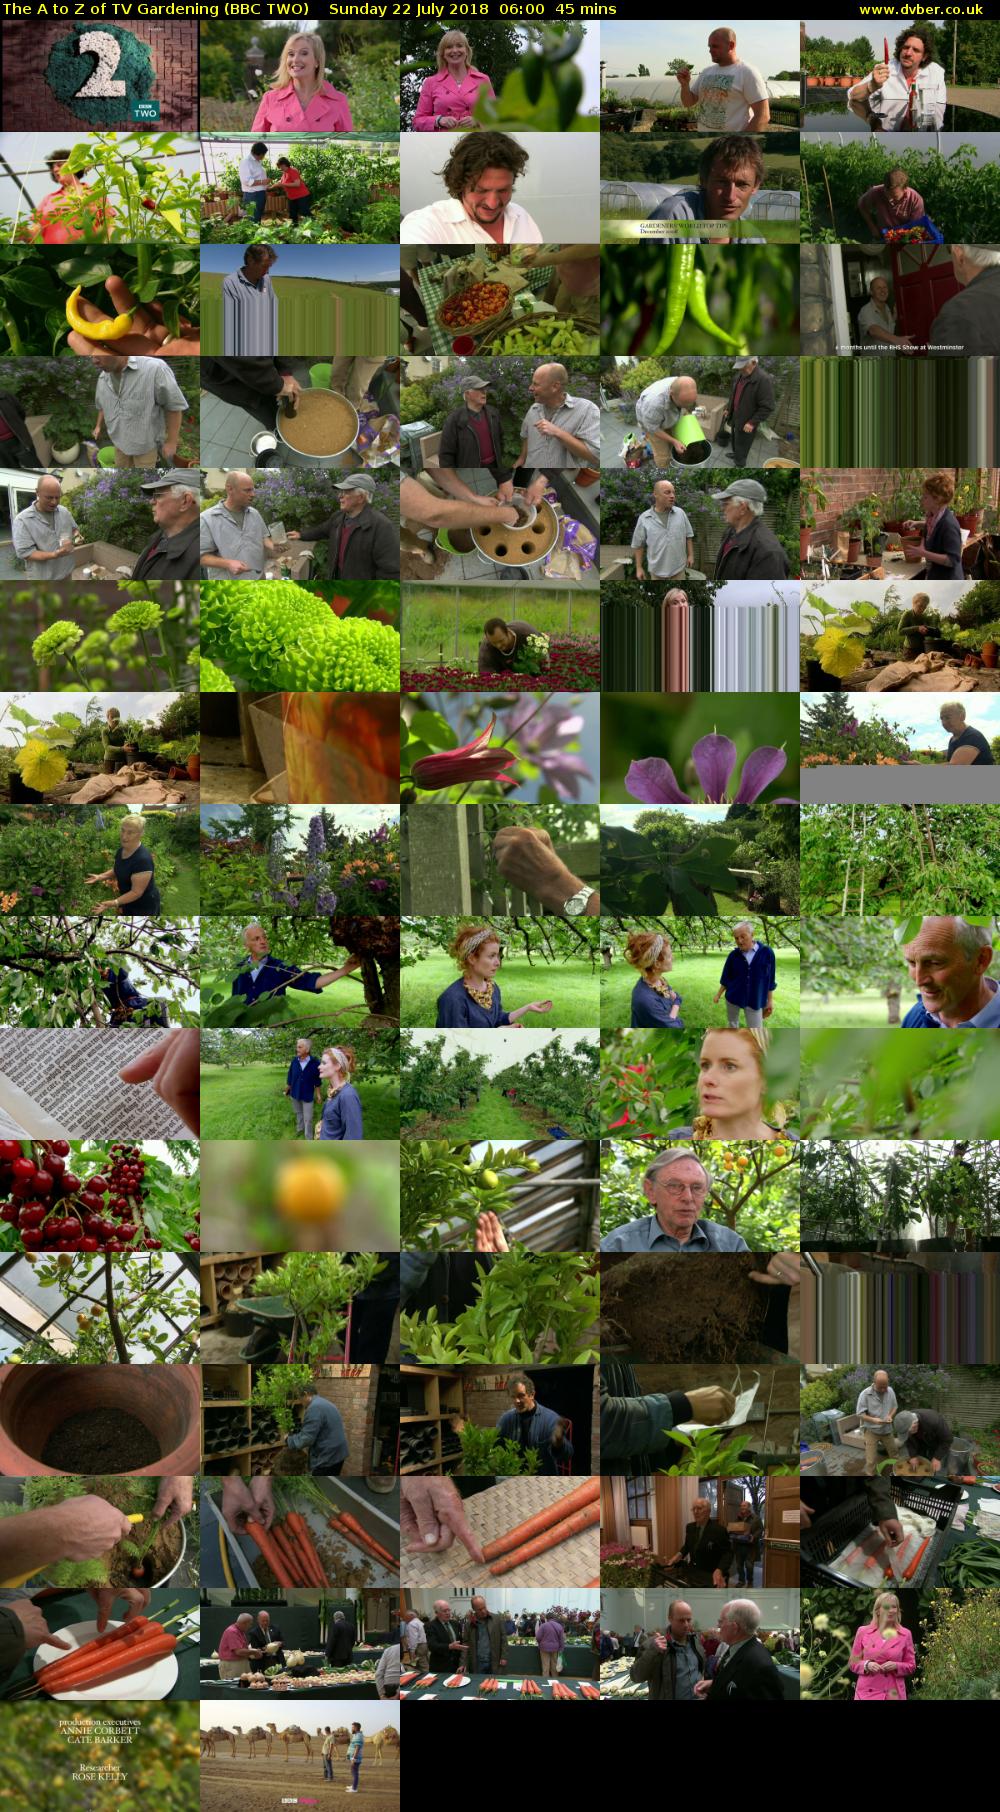 The A to Z of TV Gardening (BBC TWO) Sunday 22 July 2018 06:00 - 06:45